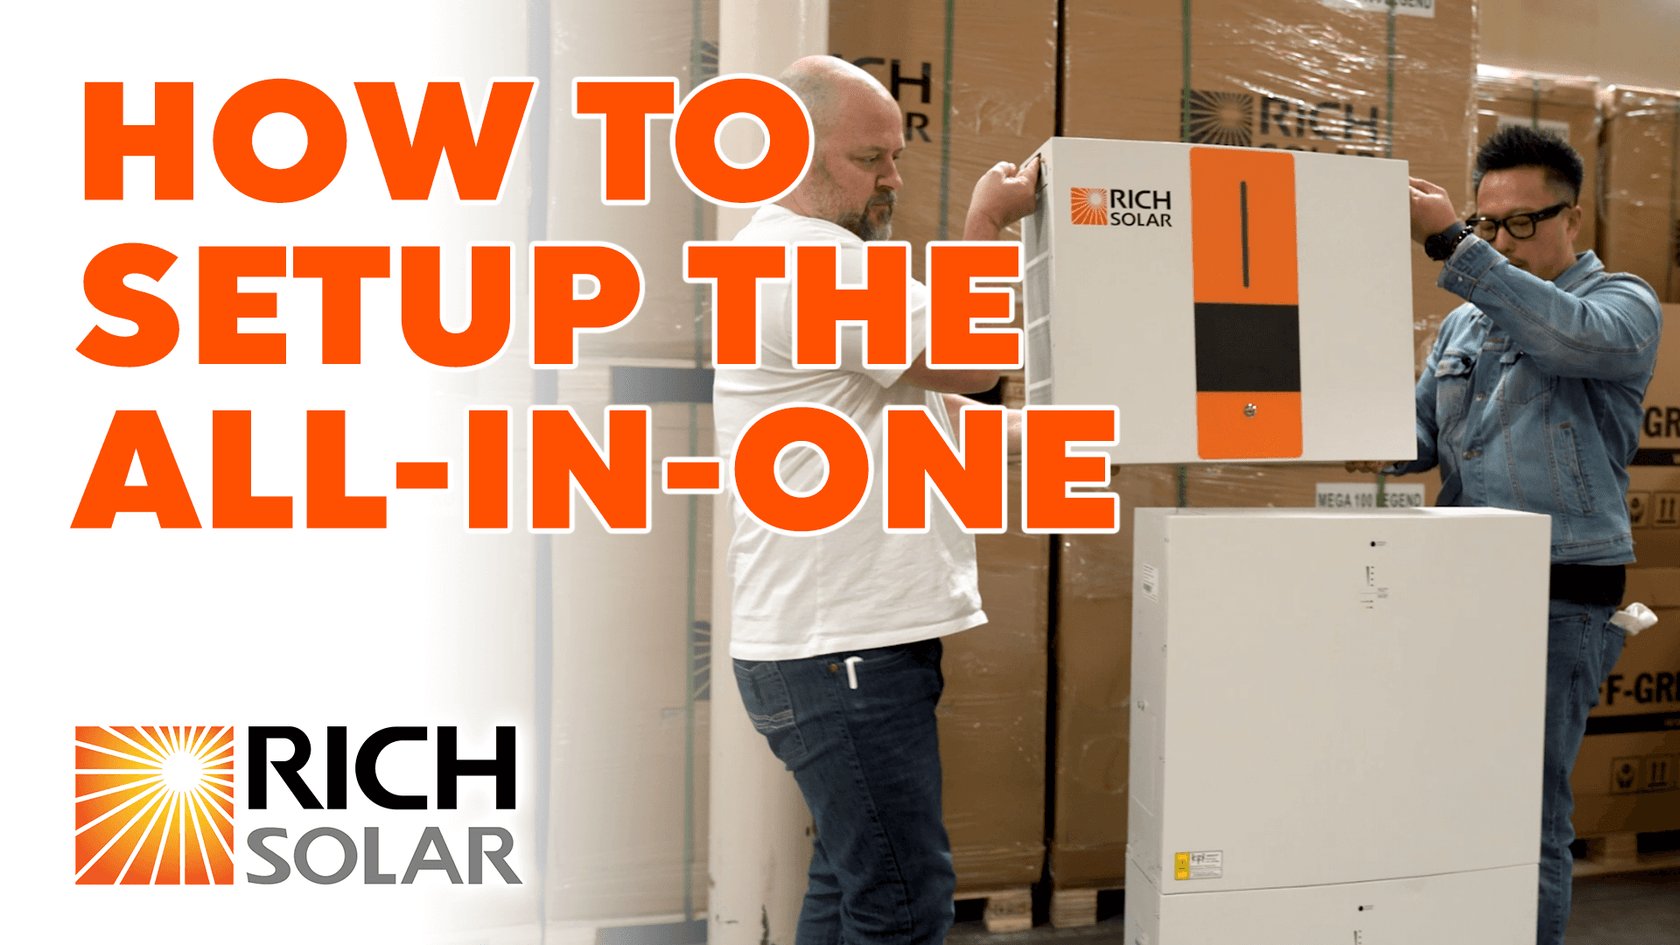 Instructional image on how to set up the All-In-One V2 solar system from RICH SOLAR, guiding users for optimal installation.